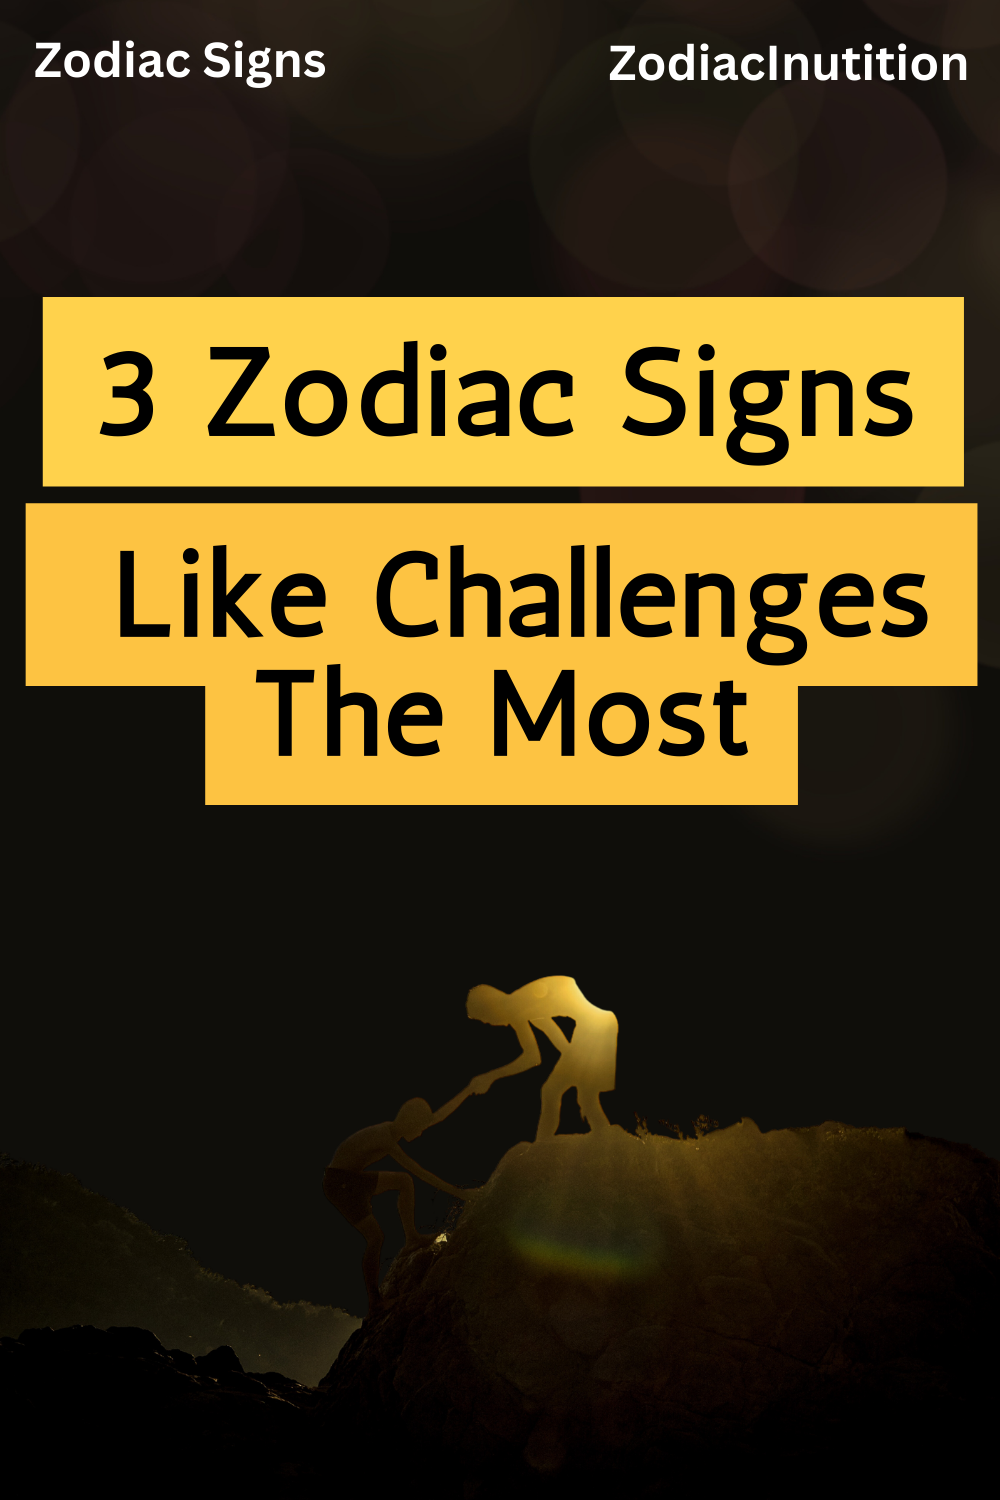 These 3 Zodiac Signs Like Challenges The Most